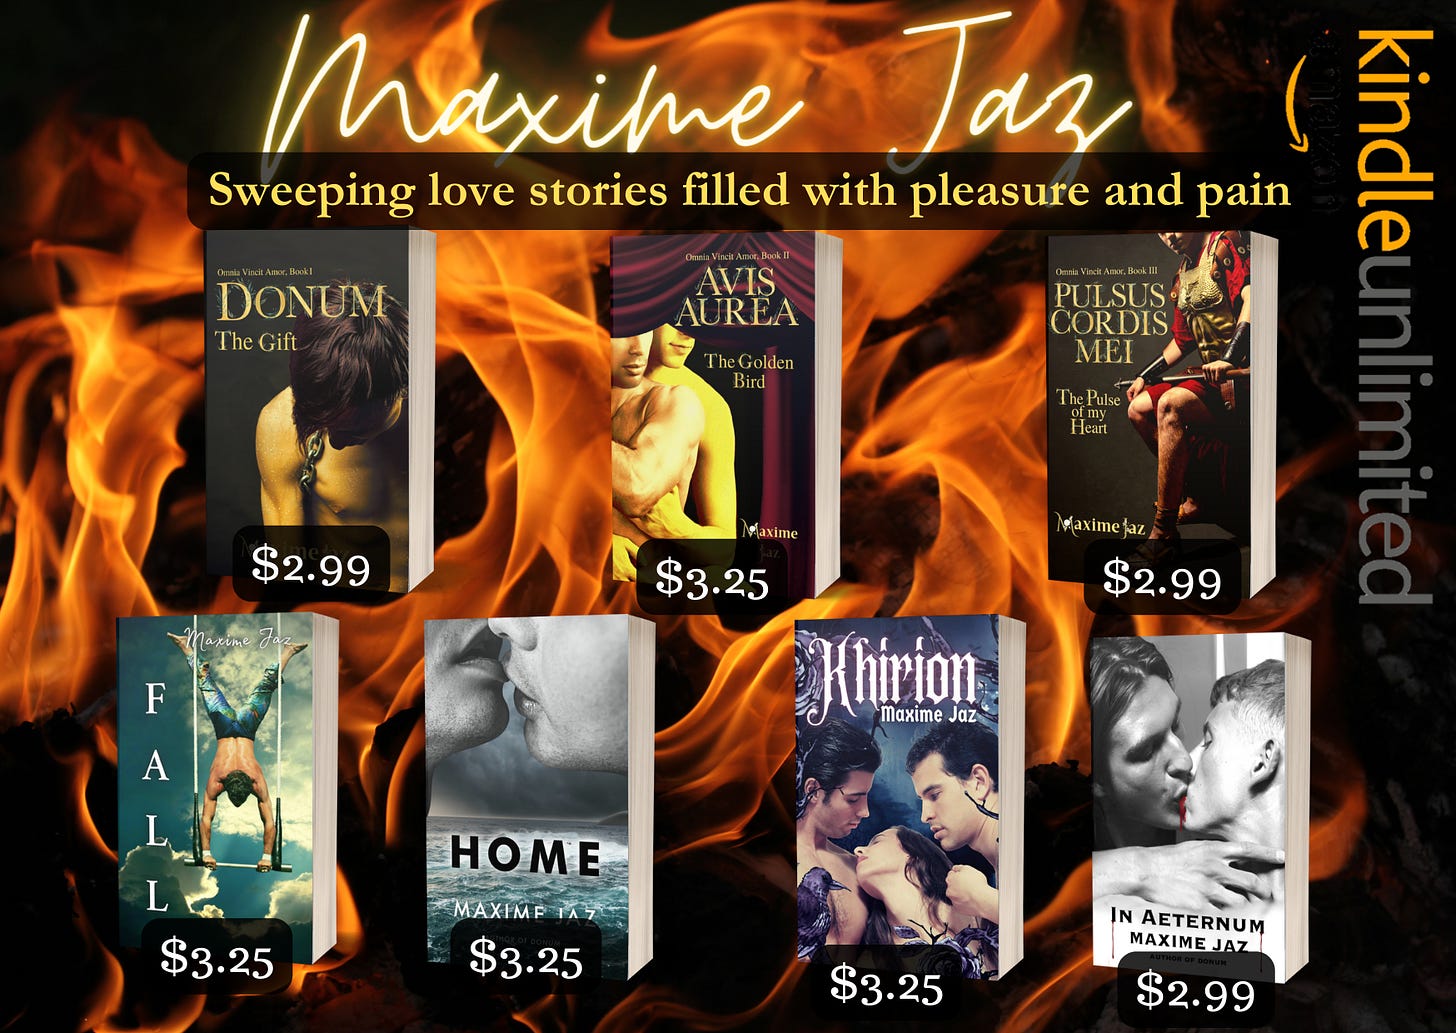 On black background with flames Top in yellow glowing handwritten font Maxime Jaz Sweeping love stories filled with pleasure and pain. From left to right mockups of the books with prices Omnia Vincit trilogy Book 1,2,3  Donum, a young man half-naked head lowered, golden skin. 2.99usd Avis Aurea, two men half-naked, one embracing the other from the back. 3.25usd Pulsus Cordis Mei a Roman general sitting in his armor. 2.99usd Fall- an acrobat doing a handstand on a trapeze swing. 3.25usd Home- two men’s lips locking on top, in greyscale, a storm in the background and a frothy sea under their faces. 3.25usd Khirion- Title in white glowing gothic font Khirion, under it the author's name Maxime Jaz. The frame is black roses on vines and a raven sitting on the left bottom corner. There are three characters in the middle, naked, they are only visible to the shoulders, and chest for the left one. Two men framing a woman. 3.25 In Aeternum - greyscale photo of two men kissing, blood between their lips. One has long black hair, the other man’s is cropped short.  In Aeternum Maxime Jaz Author of Donum in black letters, two slivers of blood flowing from the I and the M of the title. White and grey background.  2.99 KU logo horizontal on the right